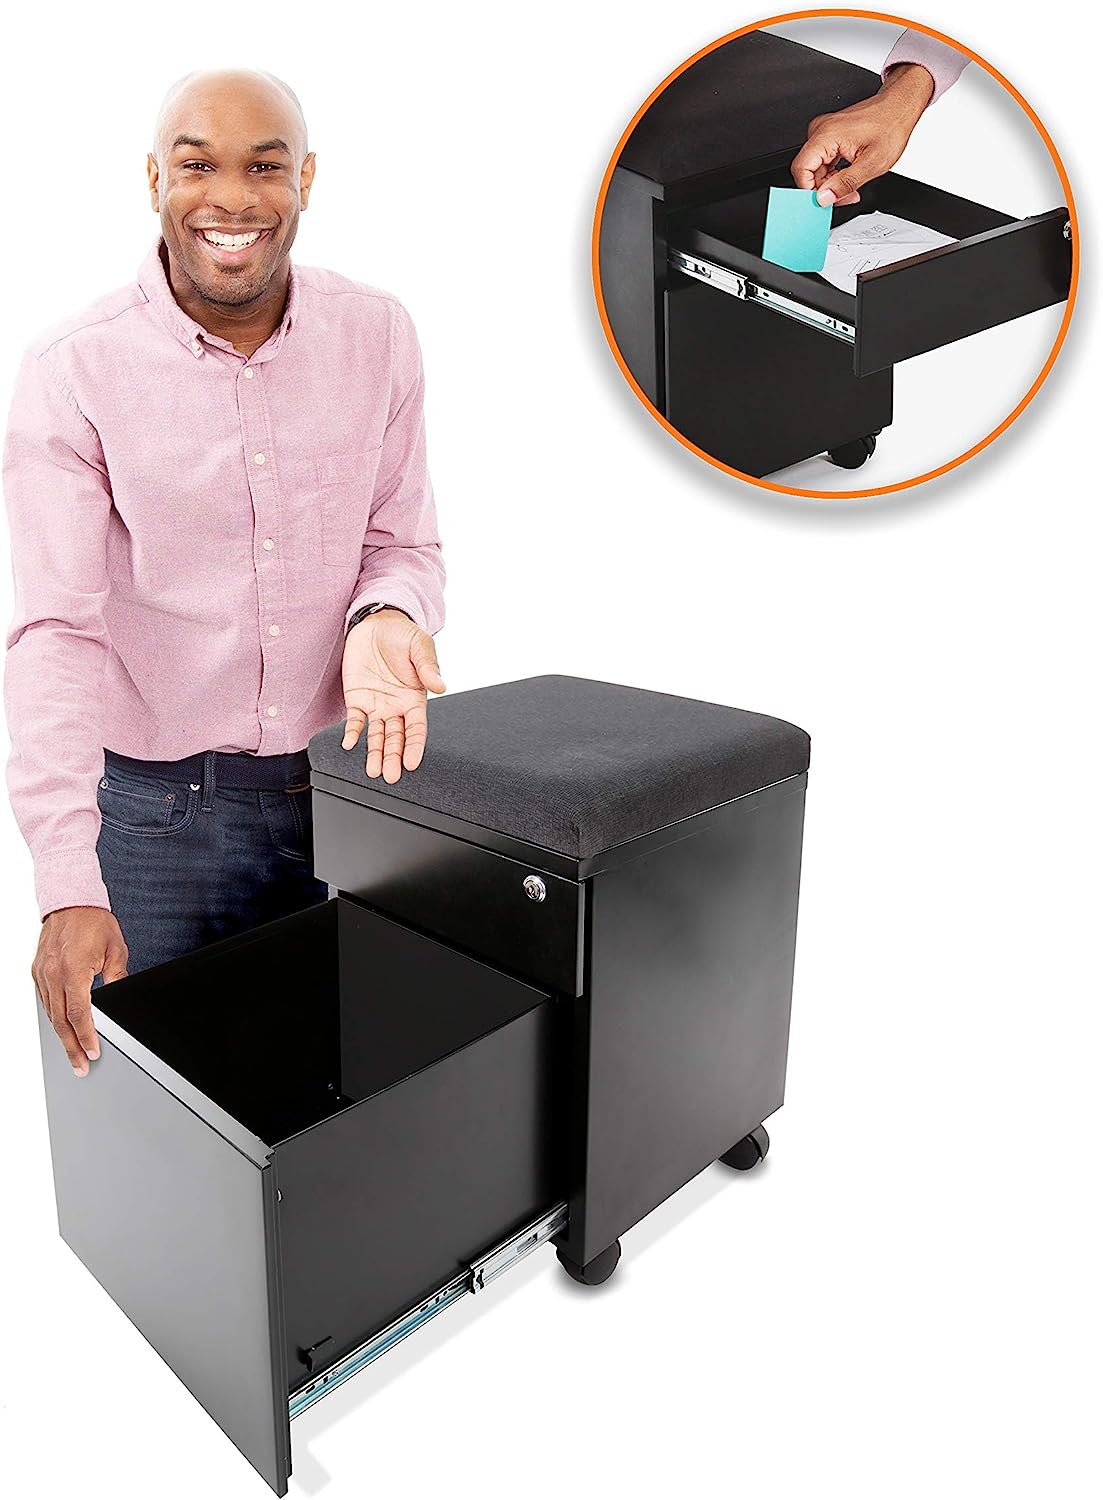 Stand Steady Vert | Rolling File Cabinet | 2 Drawer Mobile File Cabinet with Locking Storage | Small Filing Cabinet with Cushion Top for an Extra Place to Sit | Perfect for Home & Office! (Black) - image 3 of 8